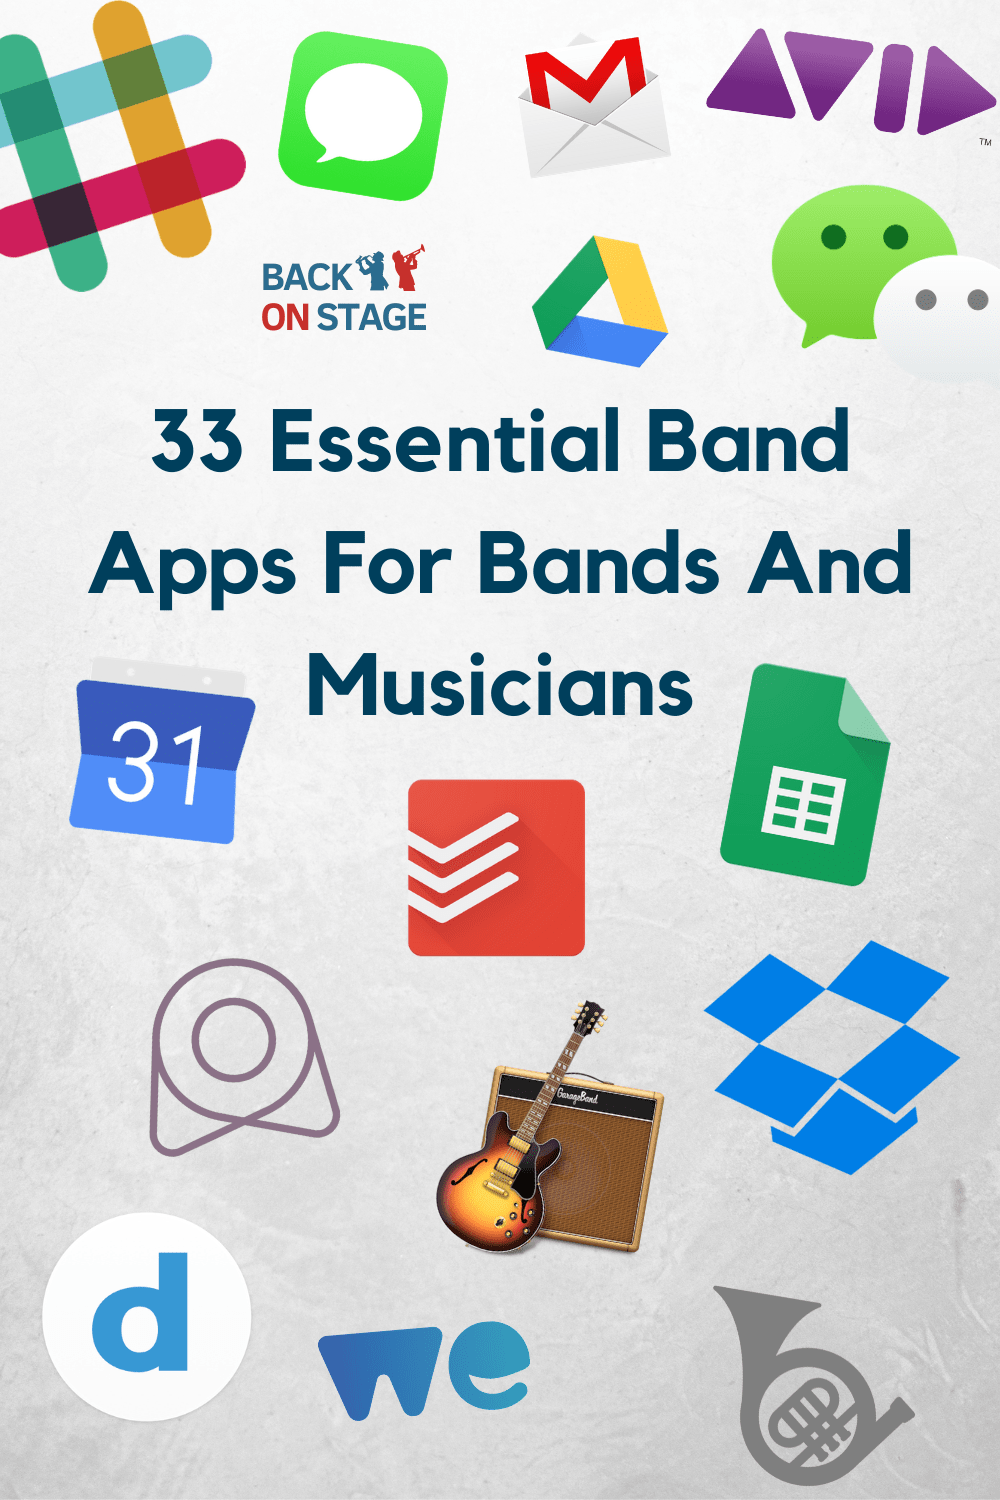 Band app and musician app choices